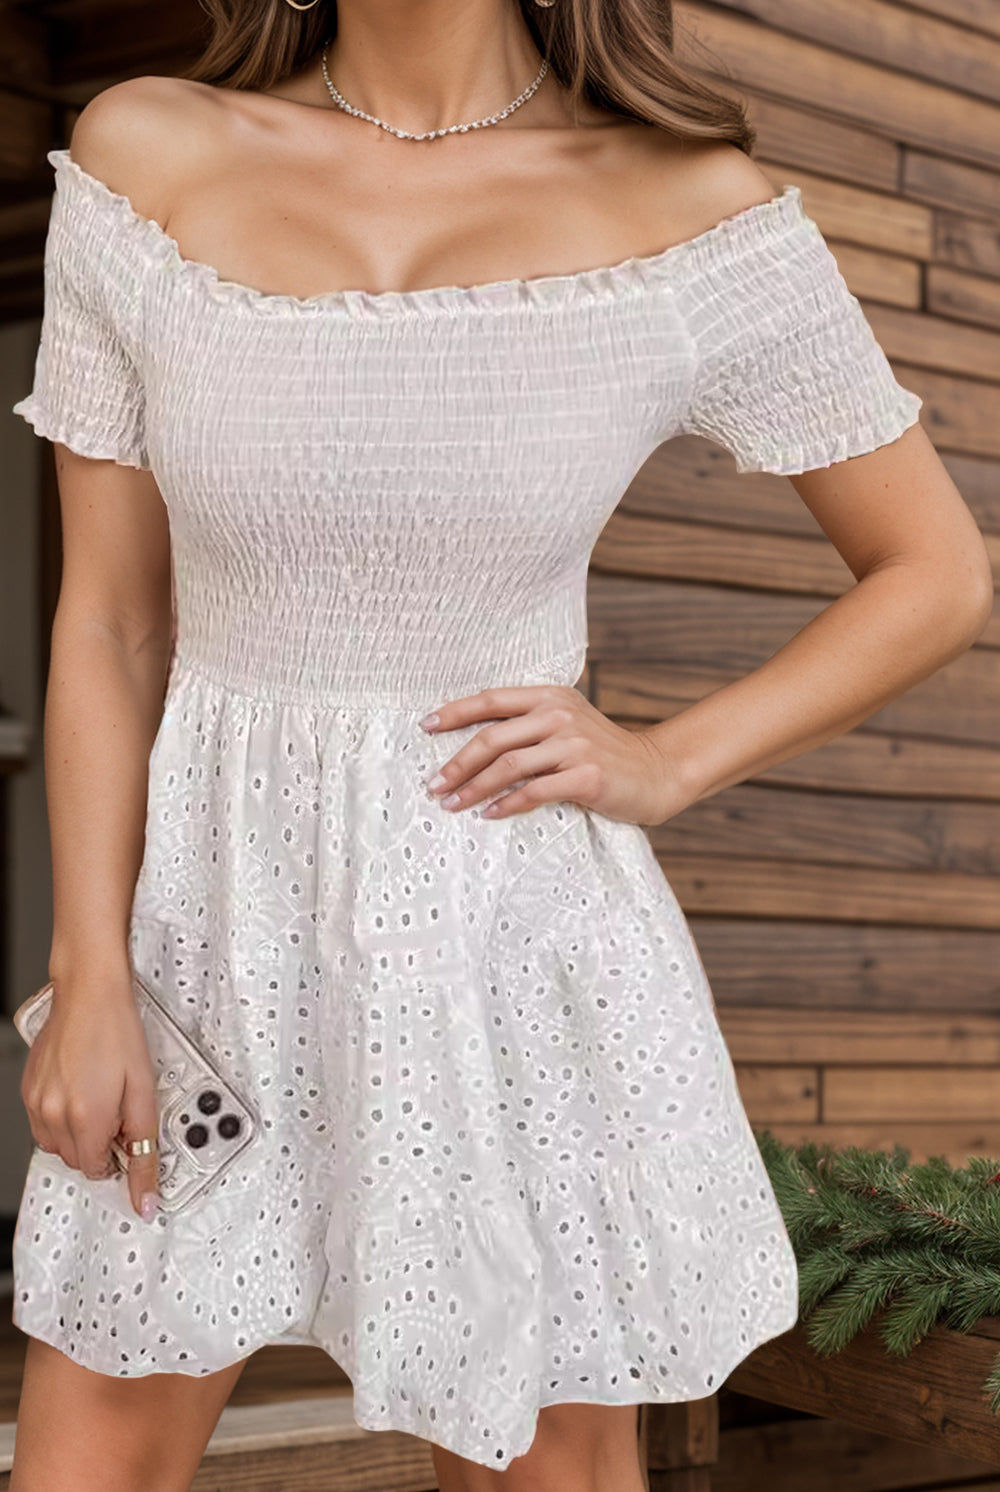 A woman radiates casual elegance in a white smocked mini dress with off-shoulder sleeves, perfect for spring and summer occasions.